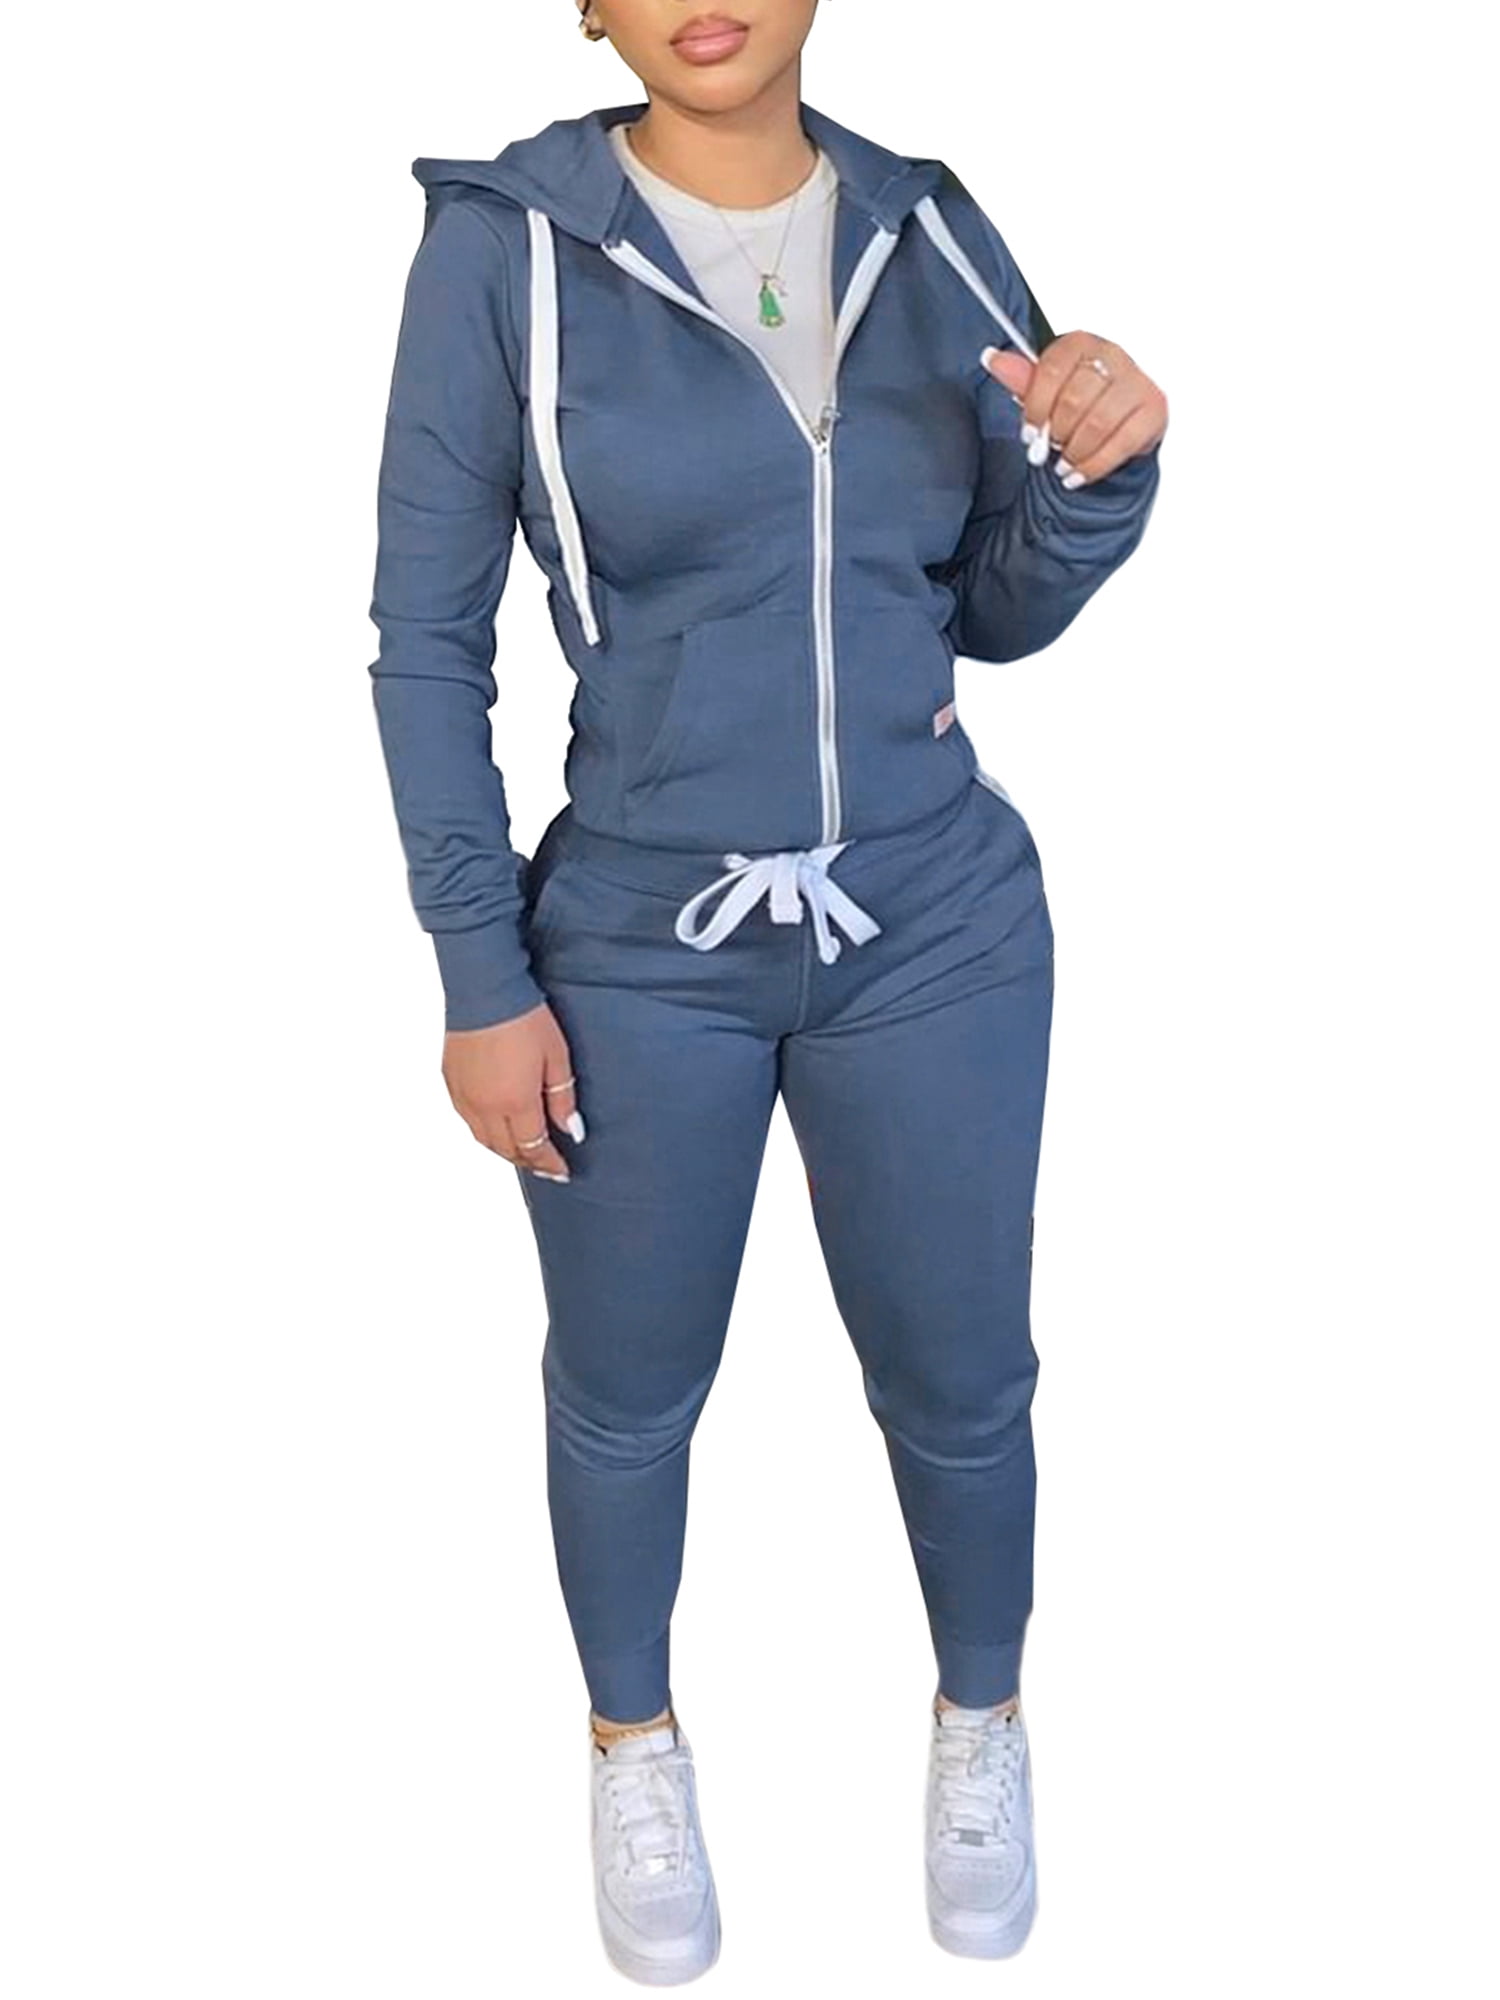 Aunavey Womens Jogging Suits Sets Running Outfit Zipper Warm Up 2 Pieces  Hoodie and Pant Tracksuit